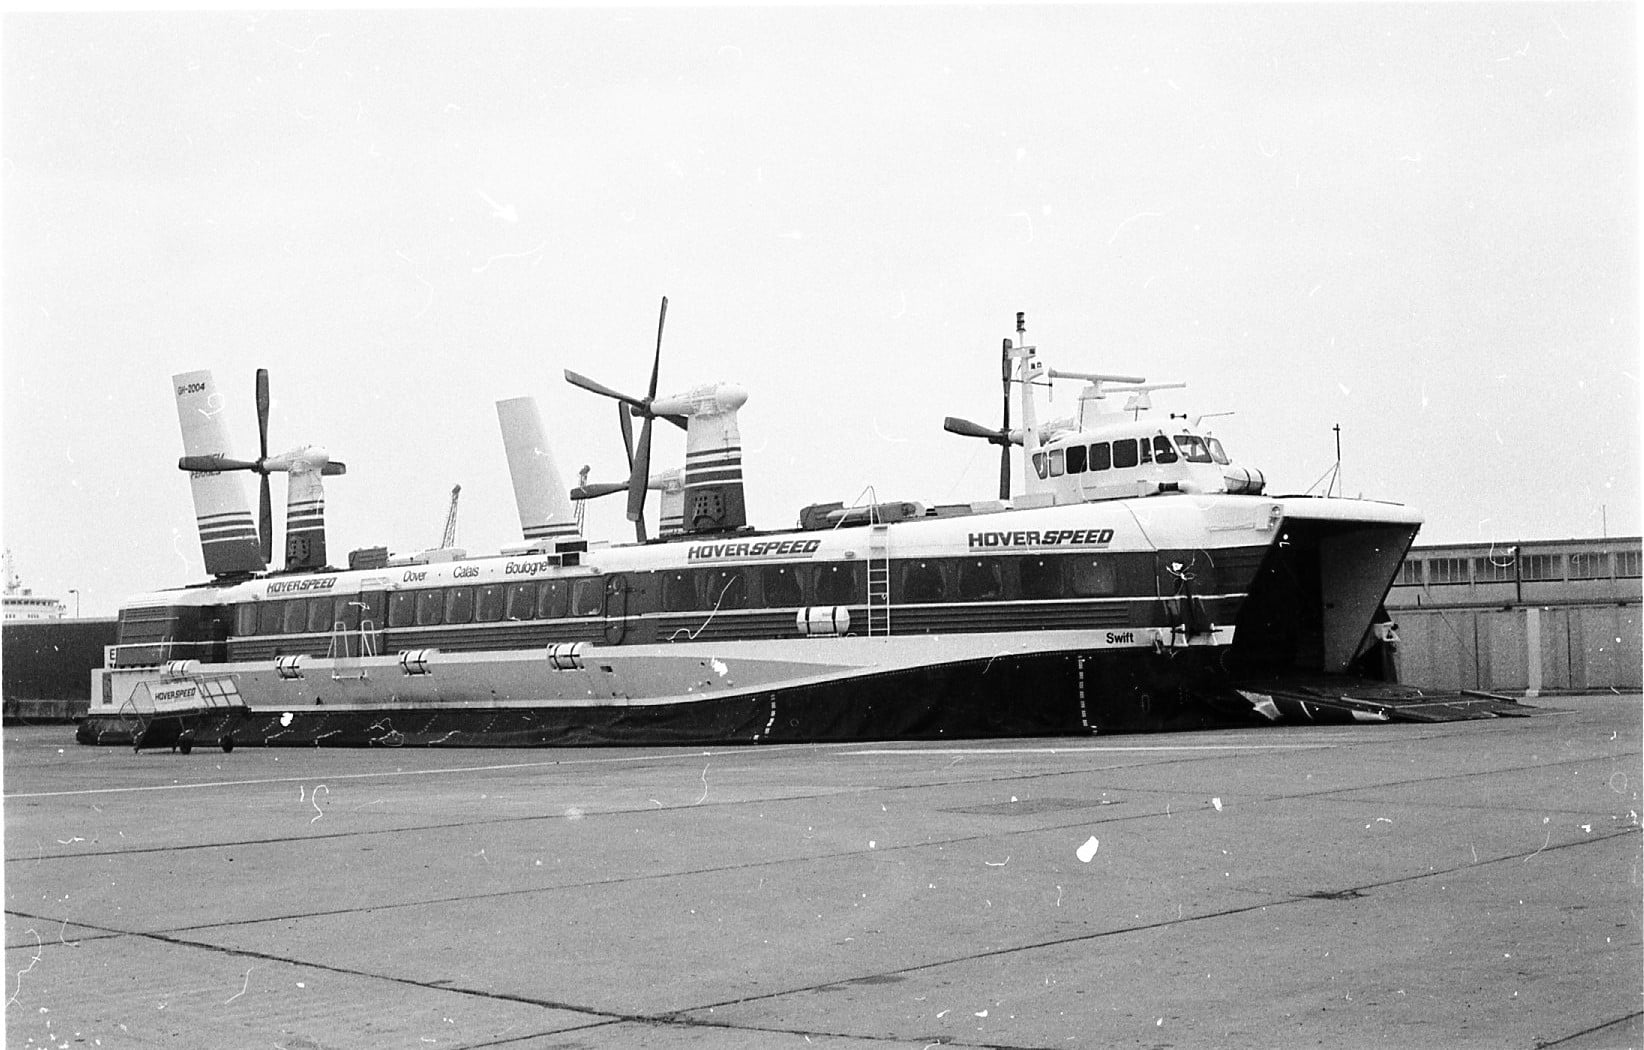 GH-2004 Swift was originally used by Hoverlloyd on their Ramsgate – Calais service. 1981 Cliver Hardy